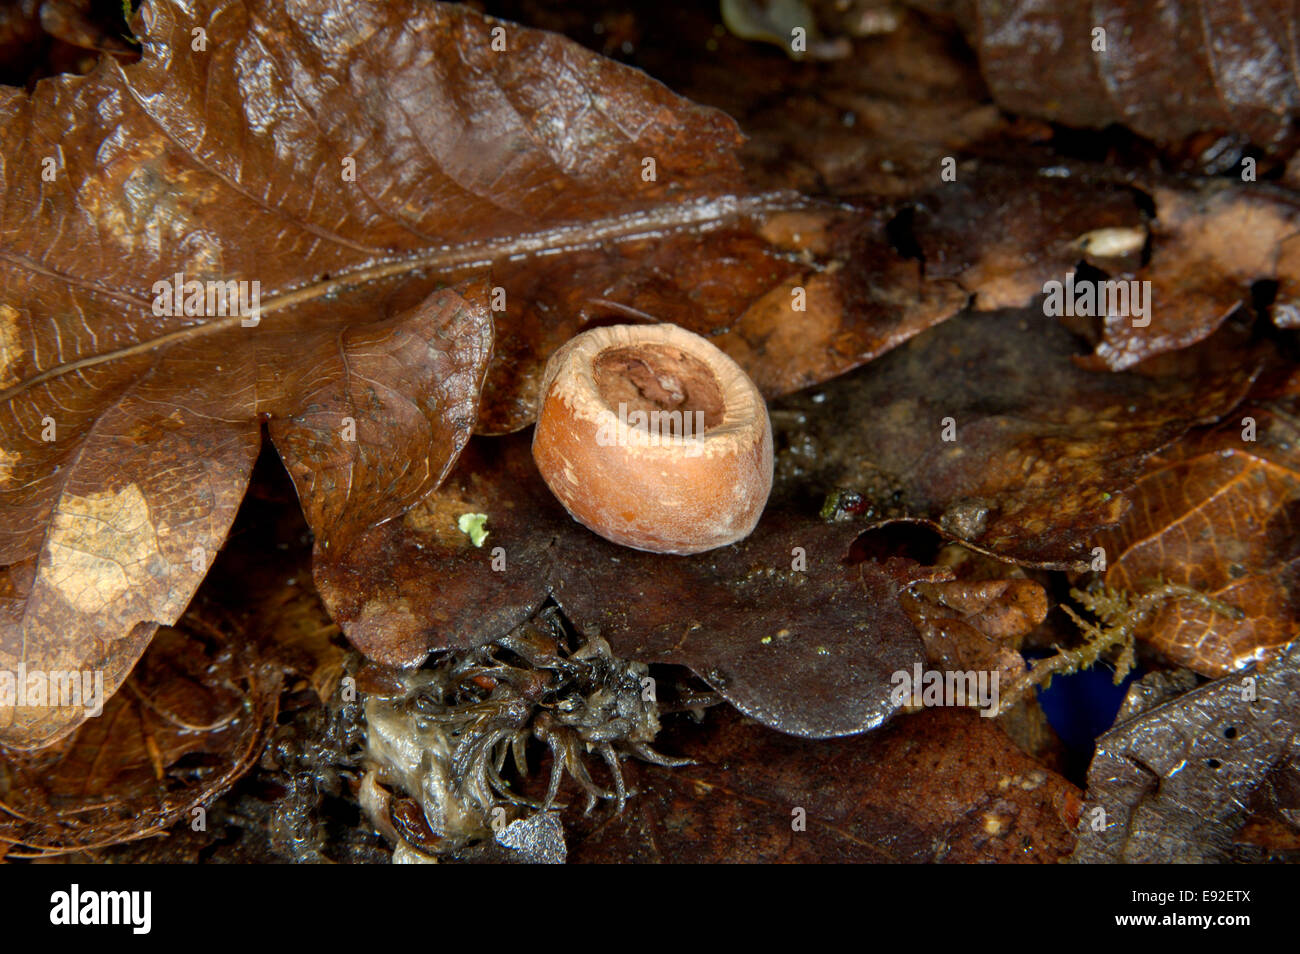 Wood Mouse nibbled nut - Apodemus sylvaticus Stock Photo